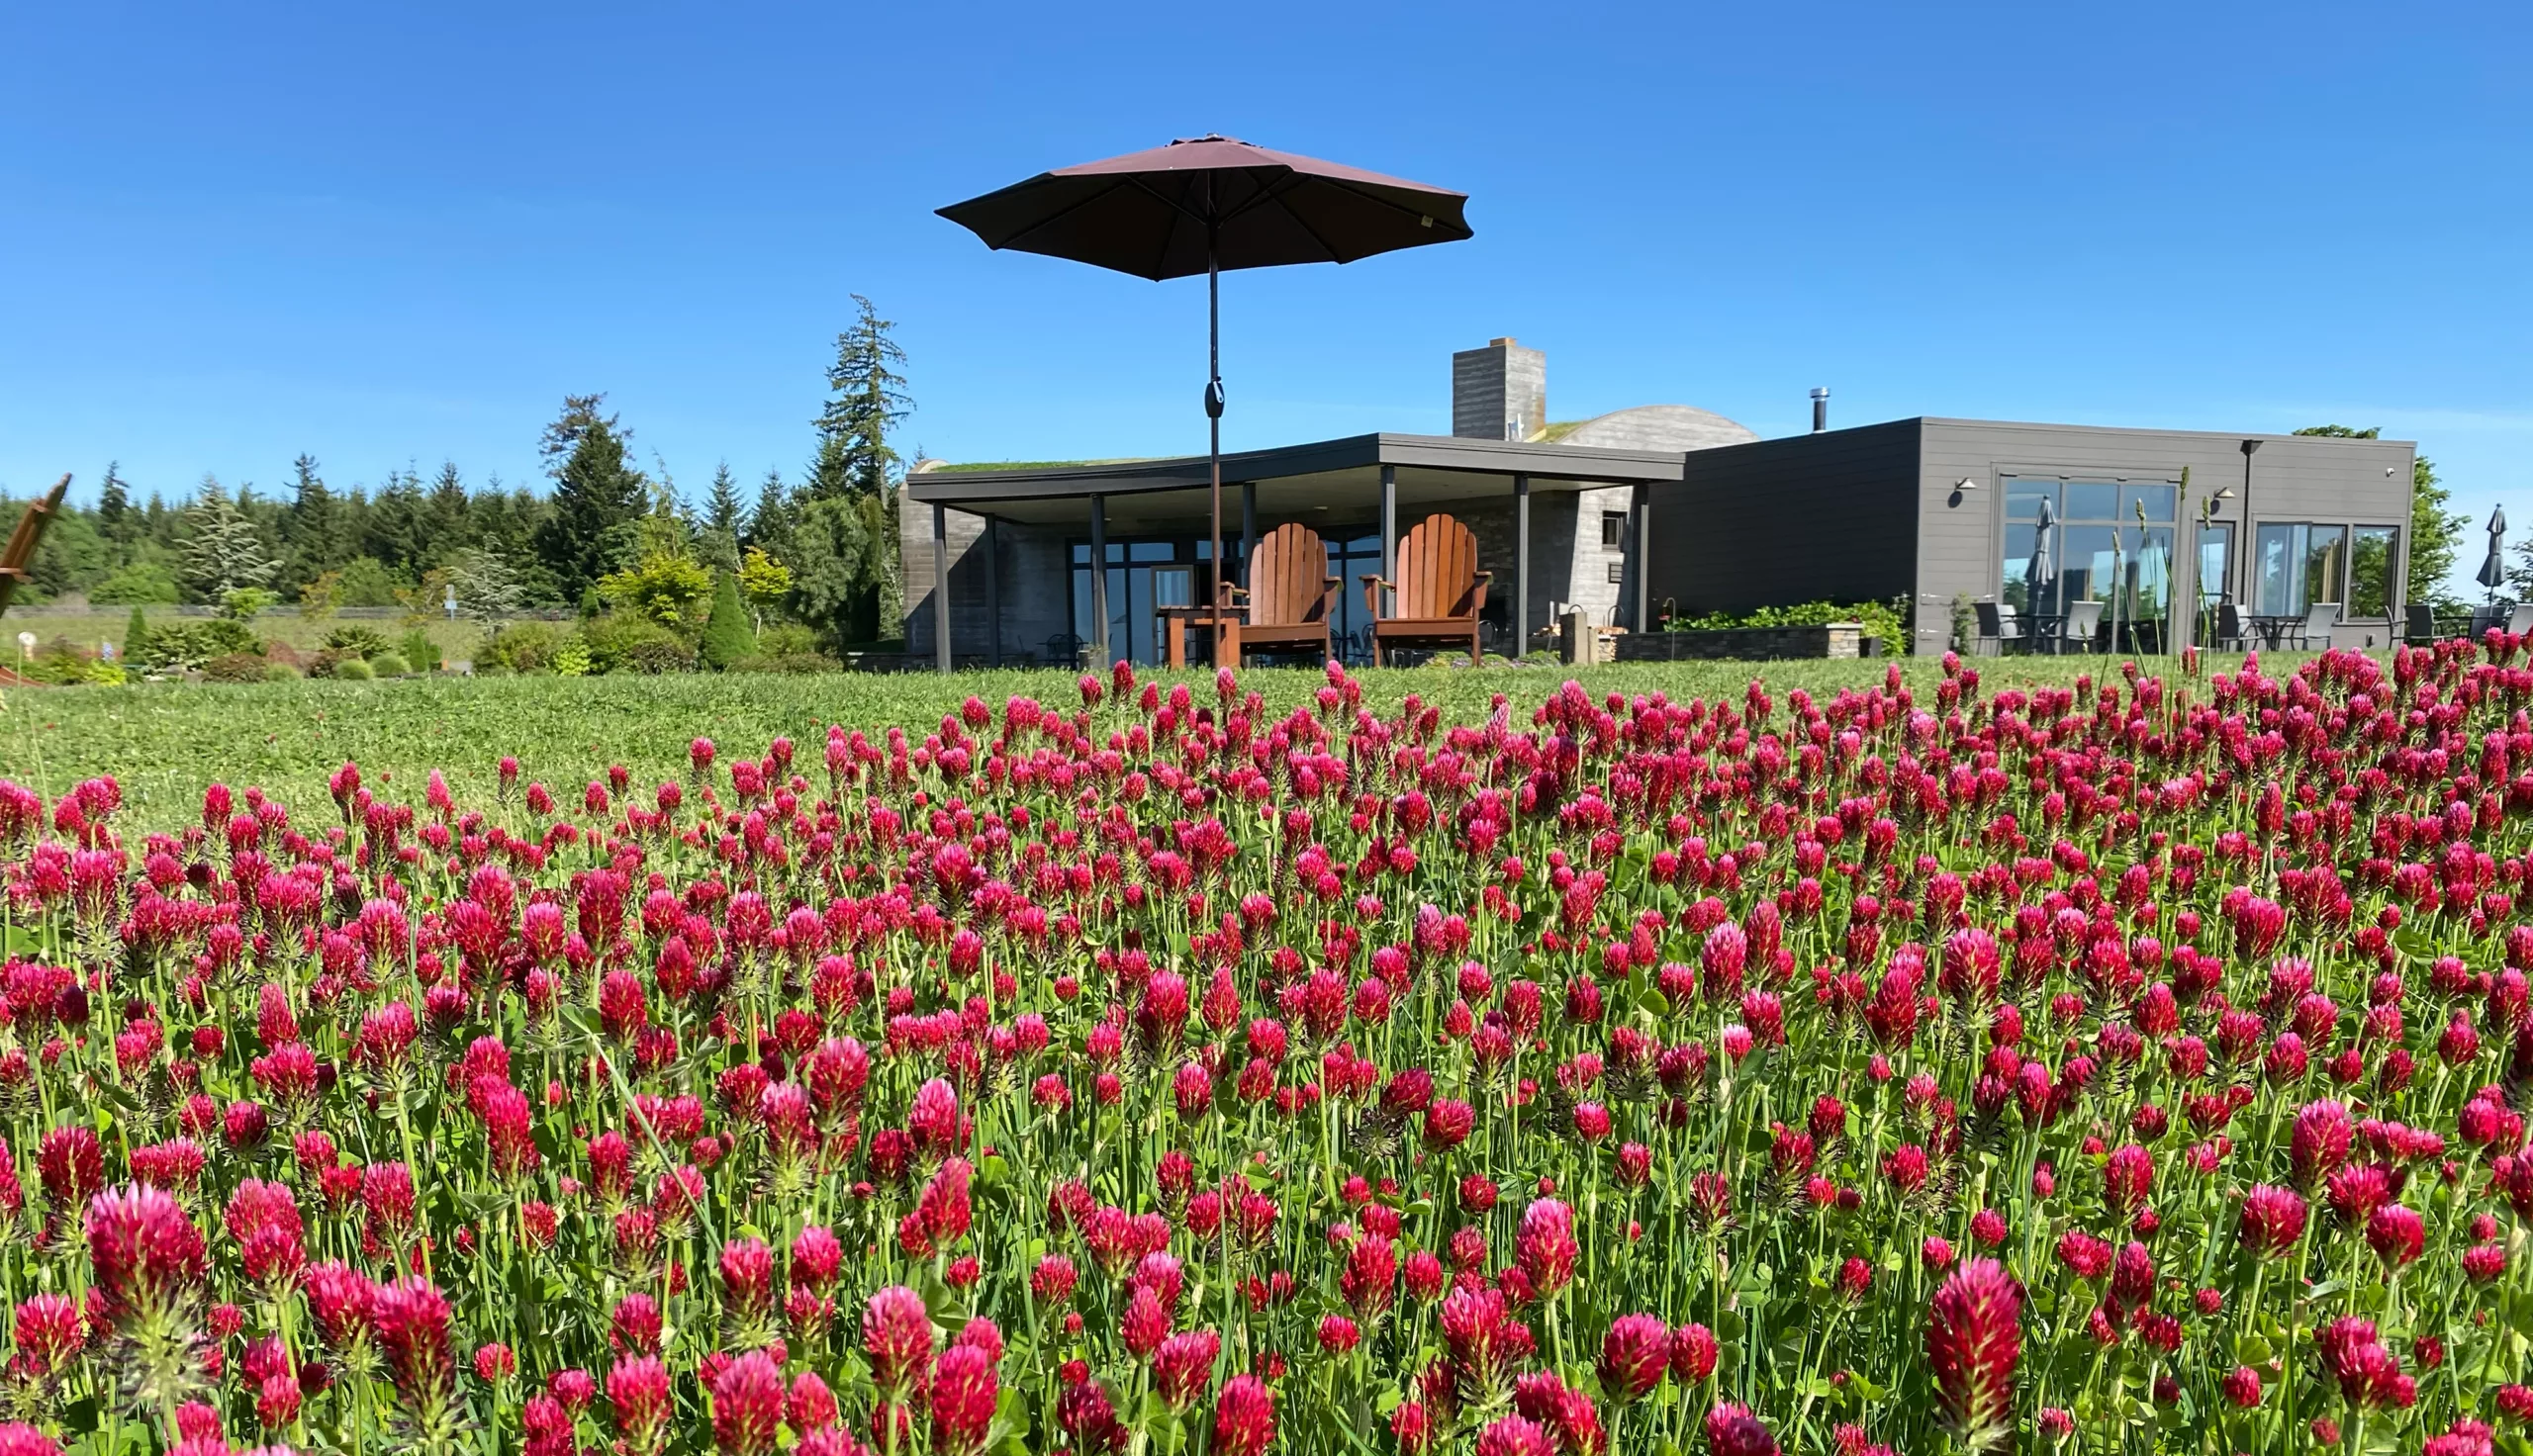 Brilliant crimson clover in bloom beneath a blue sky surrounds the tasting room and patios at Fairsing Vineyard in Oregon's Willamette Valley